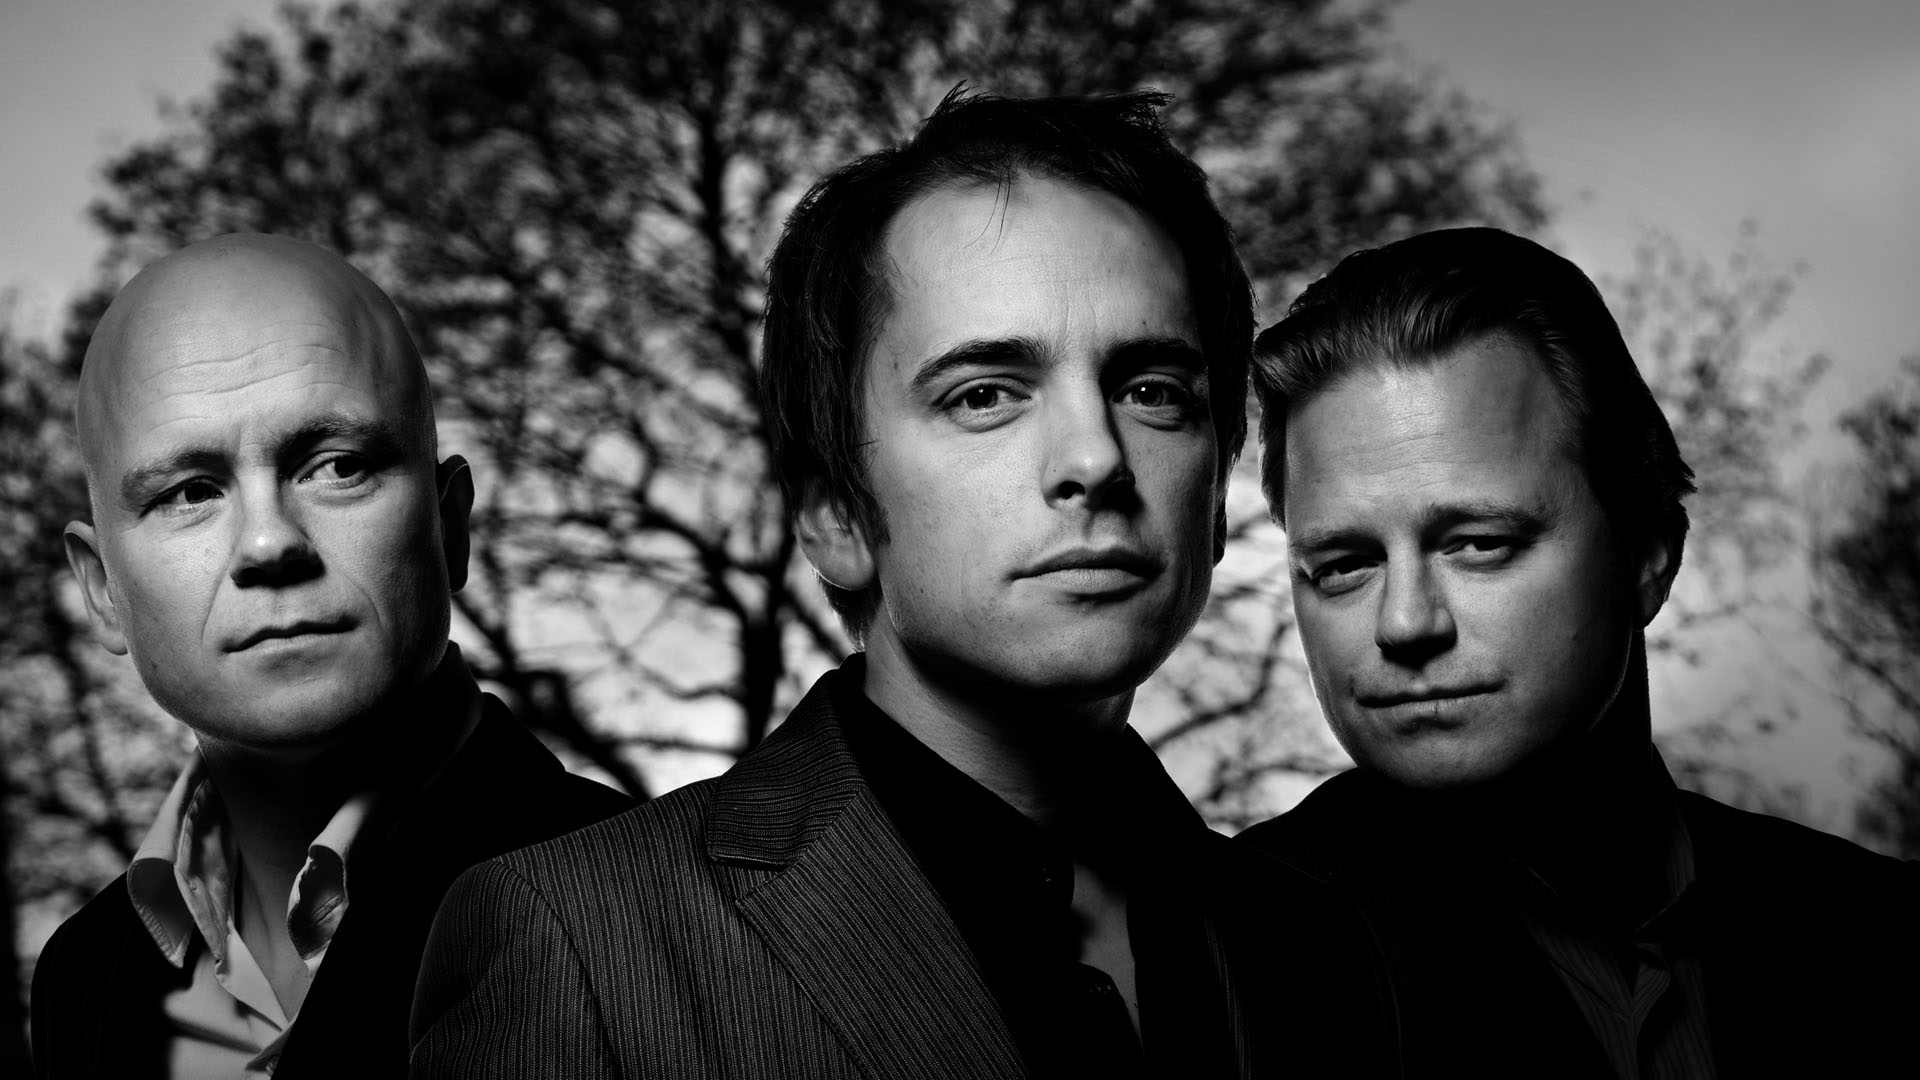 Reach Out And Touch It av Tord Gustavsen Trio